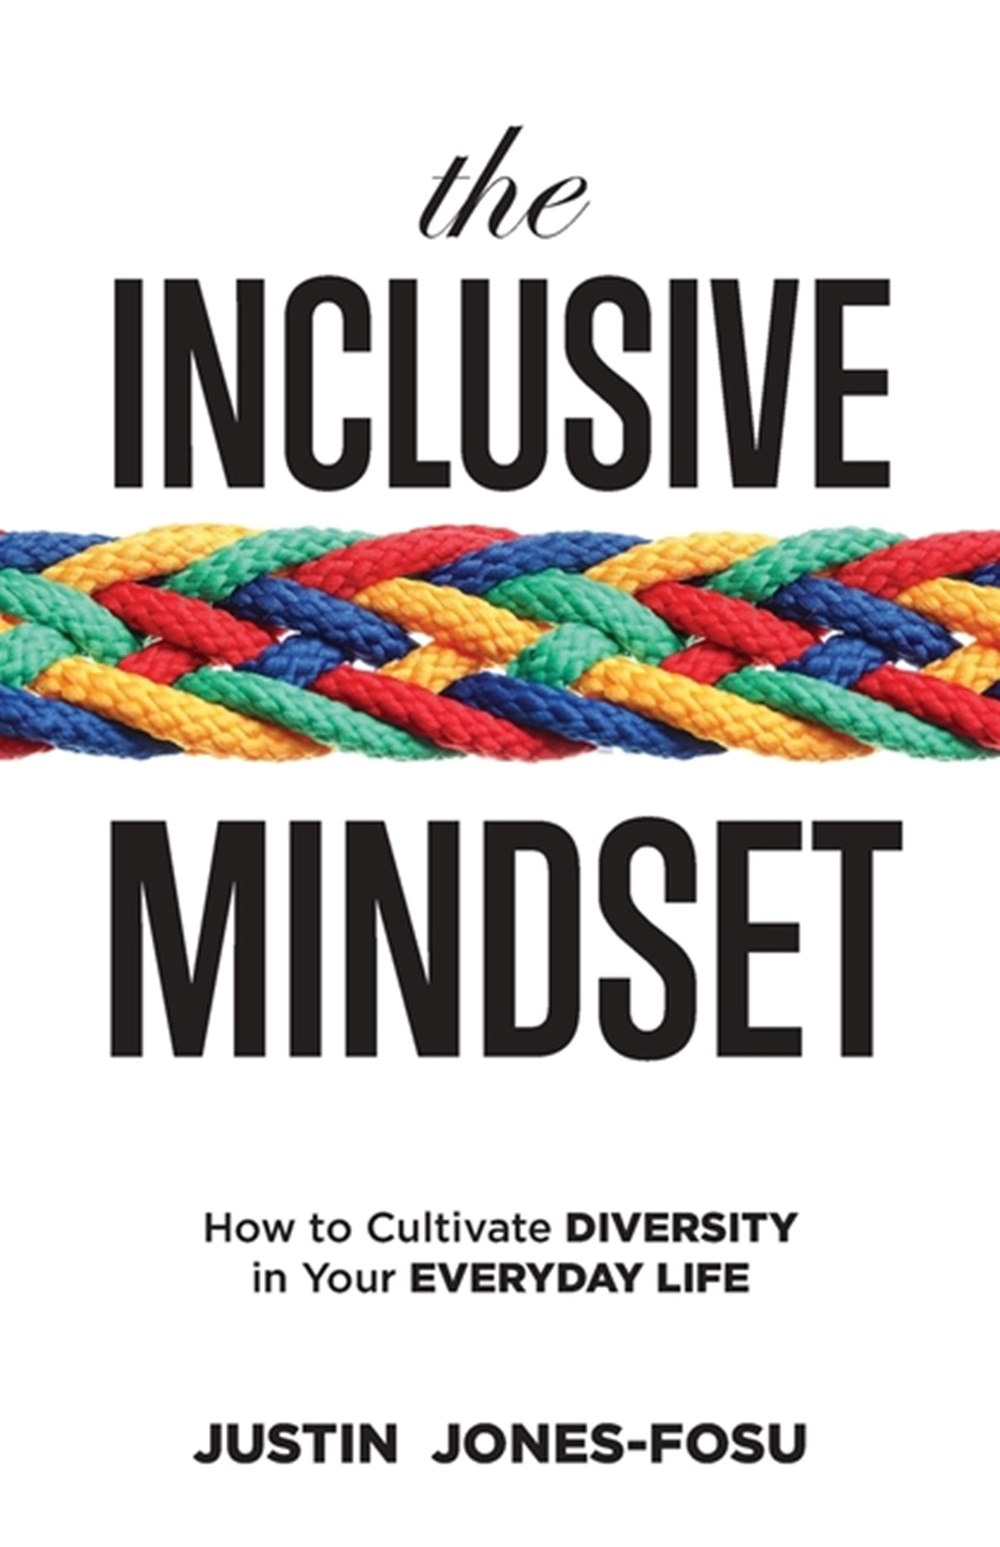 Inclusive Mindset: How to Cultivate Diversity in Your Everyday Life